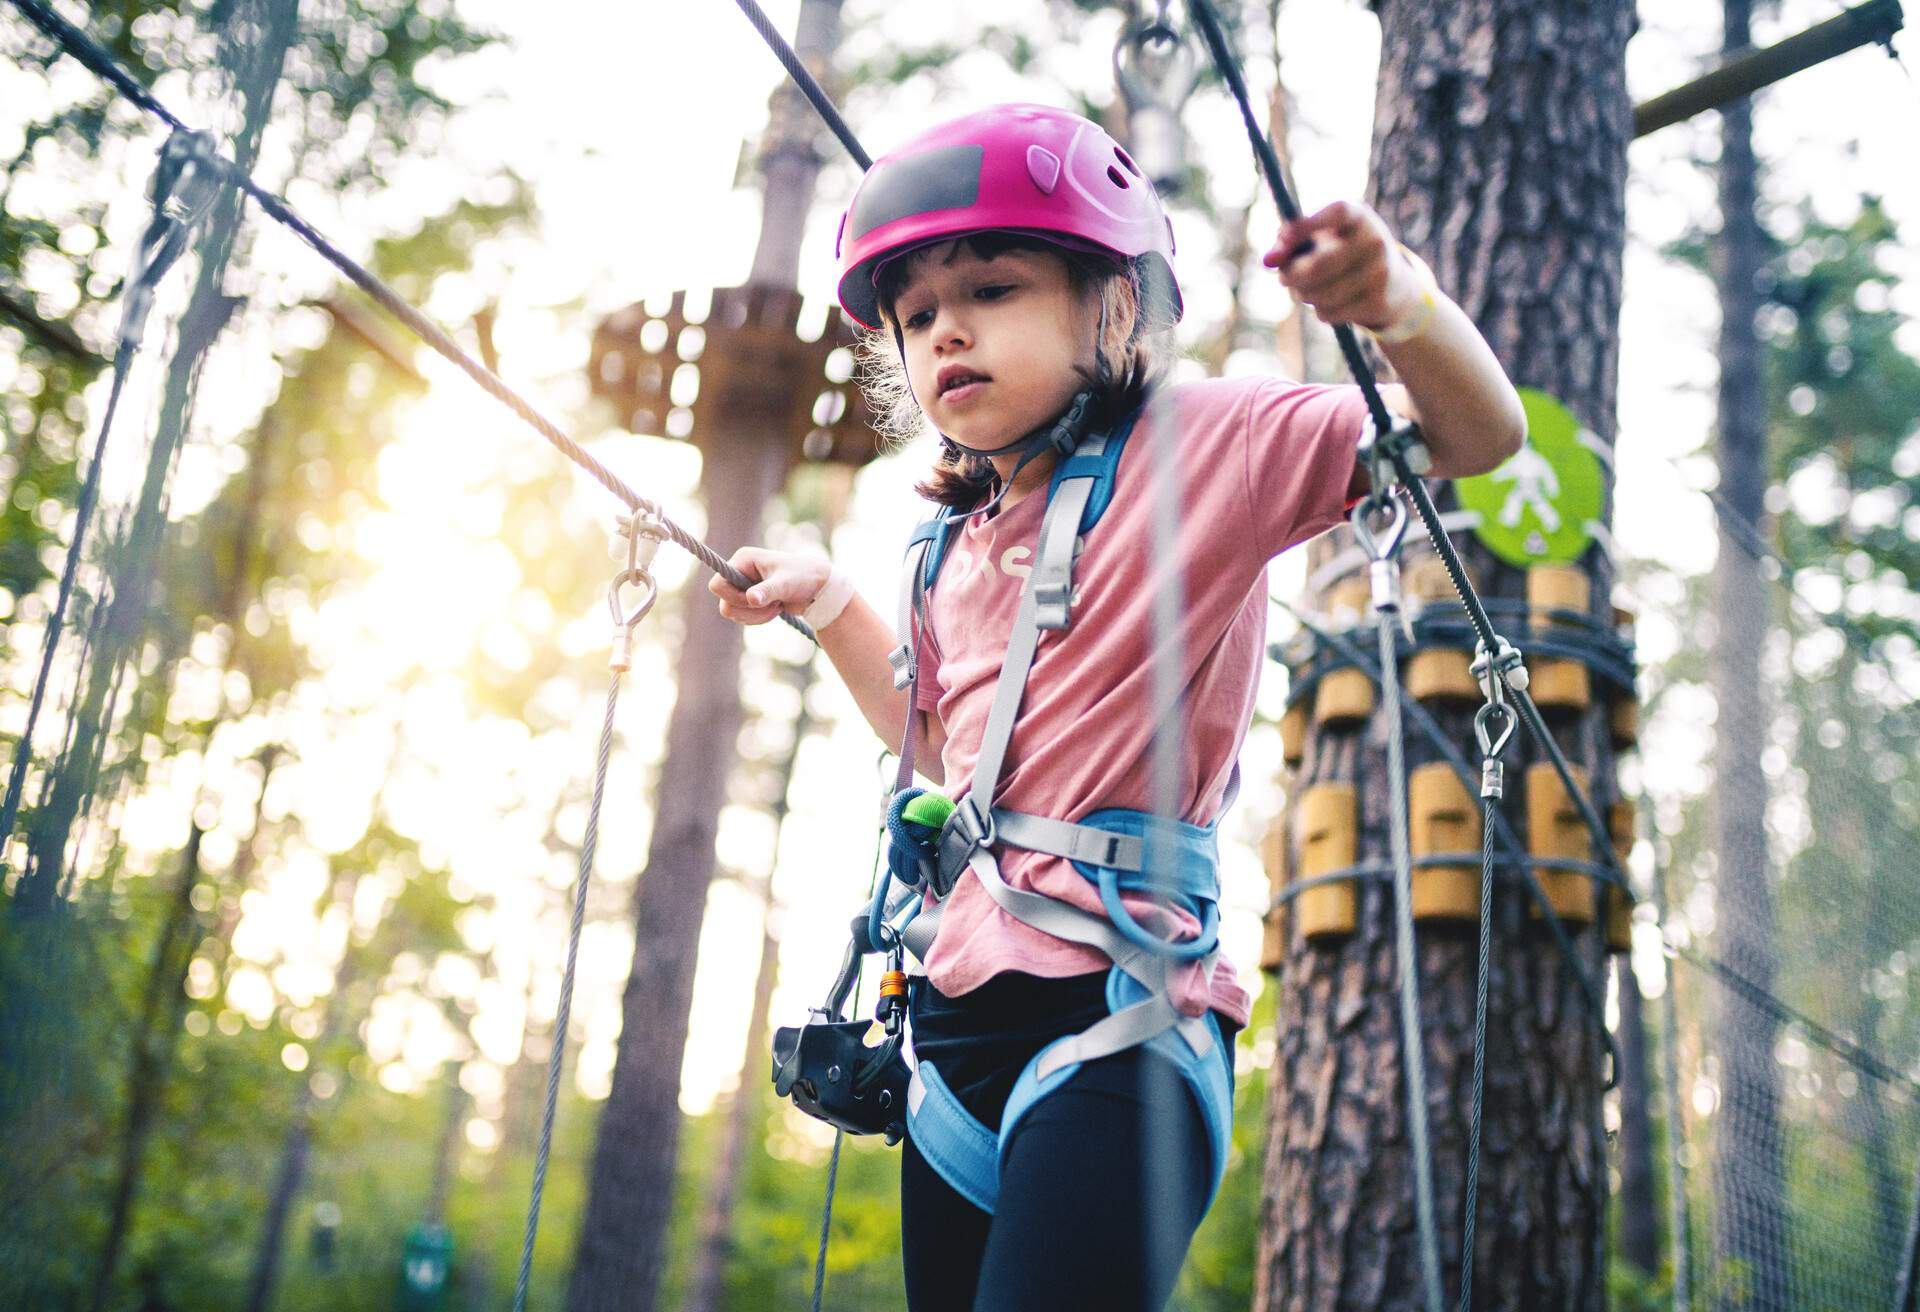 THEME_PEOPLE_KID_GIRL_ADVENTURE_PARK_ZIP_LINE_FOREST_GettyImages-1175052474